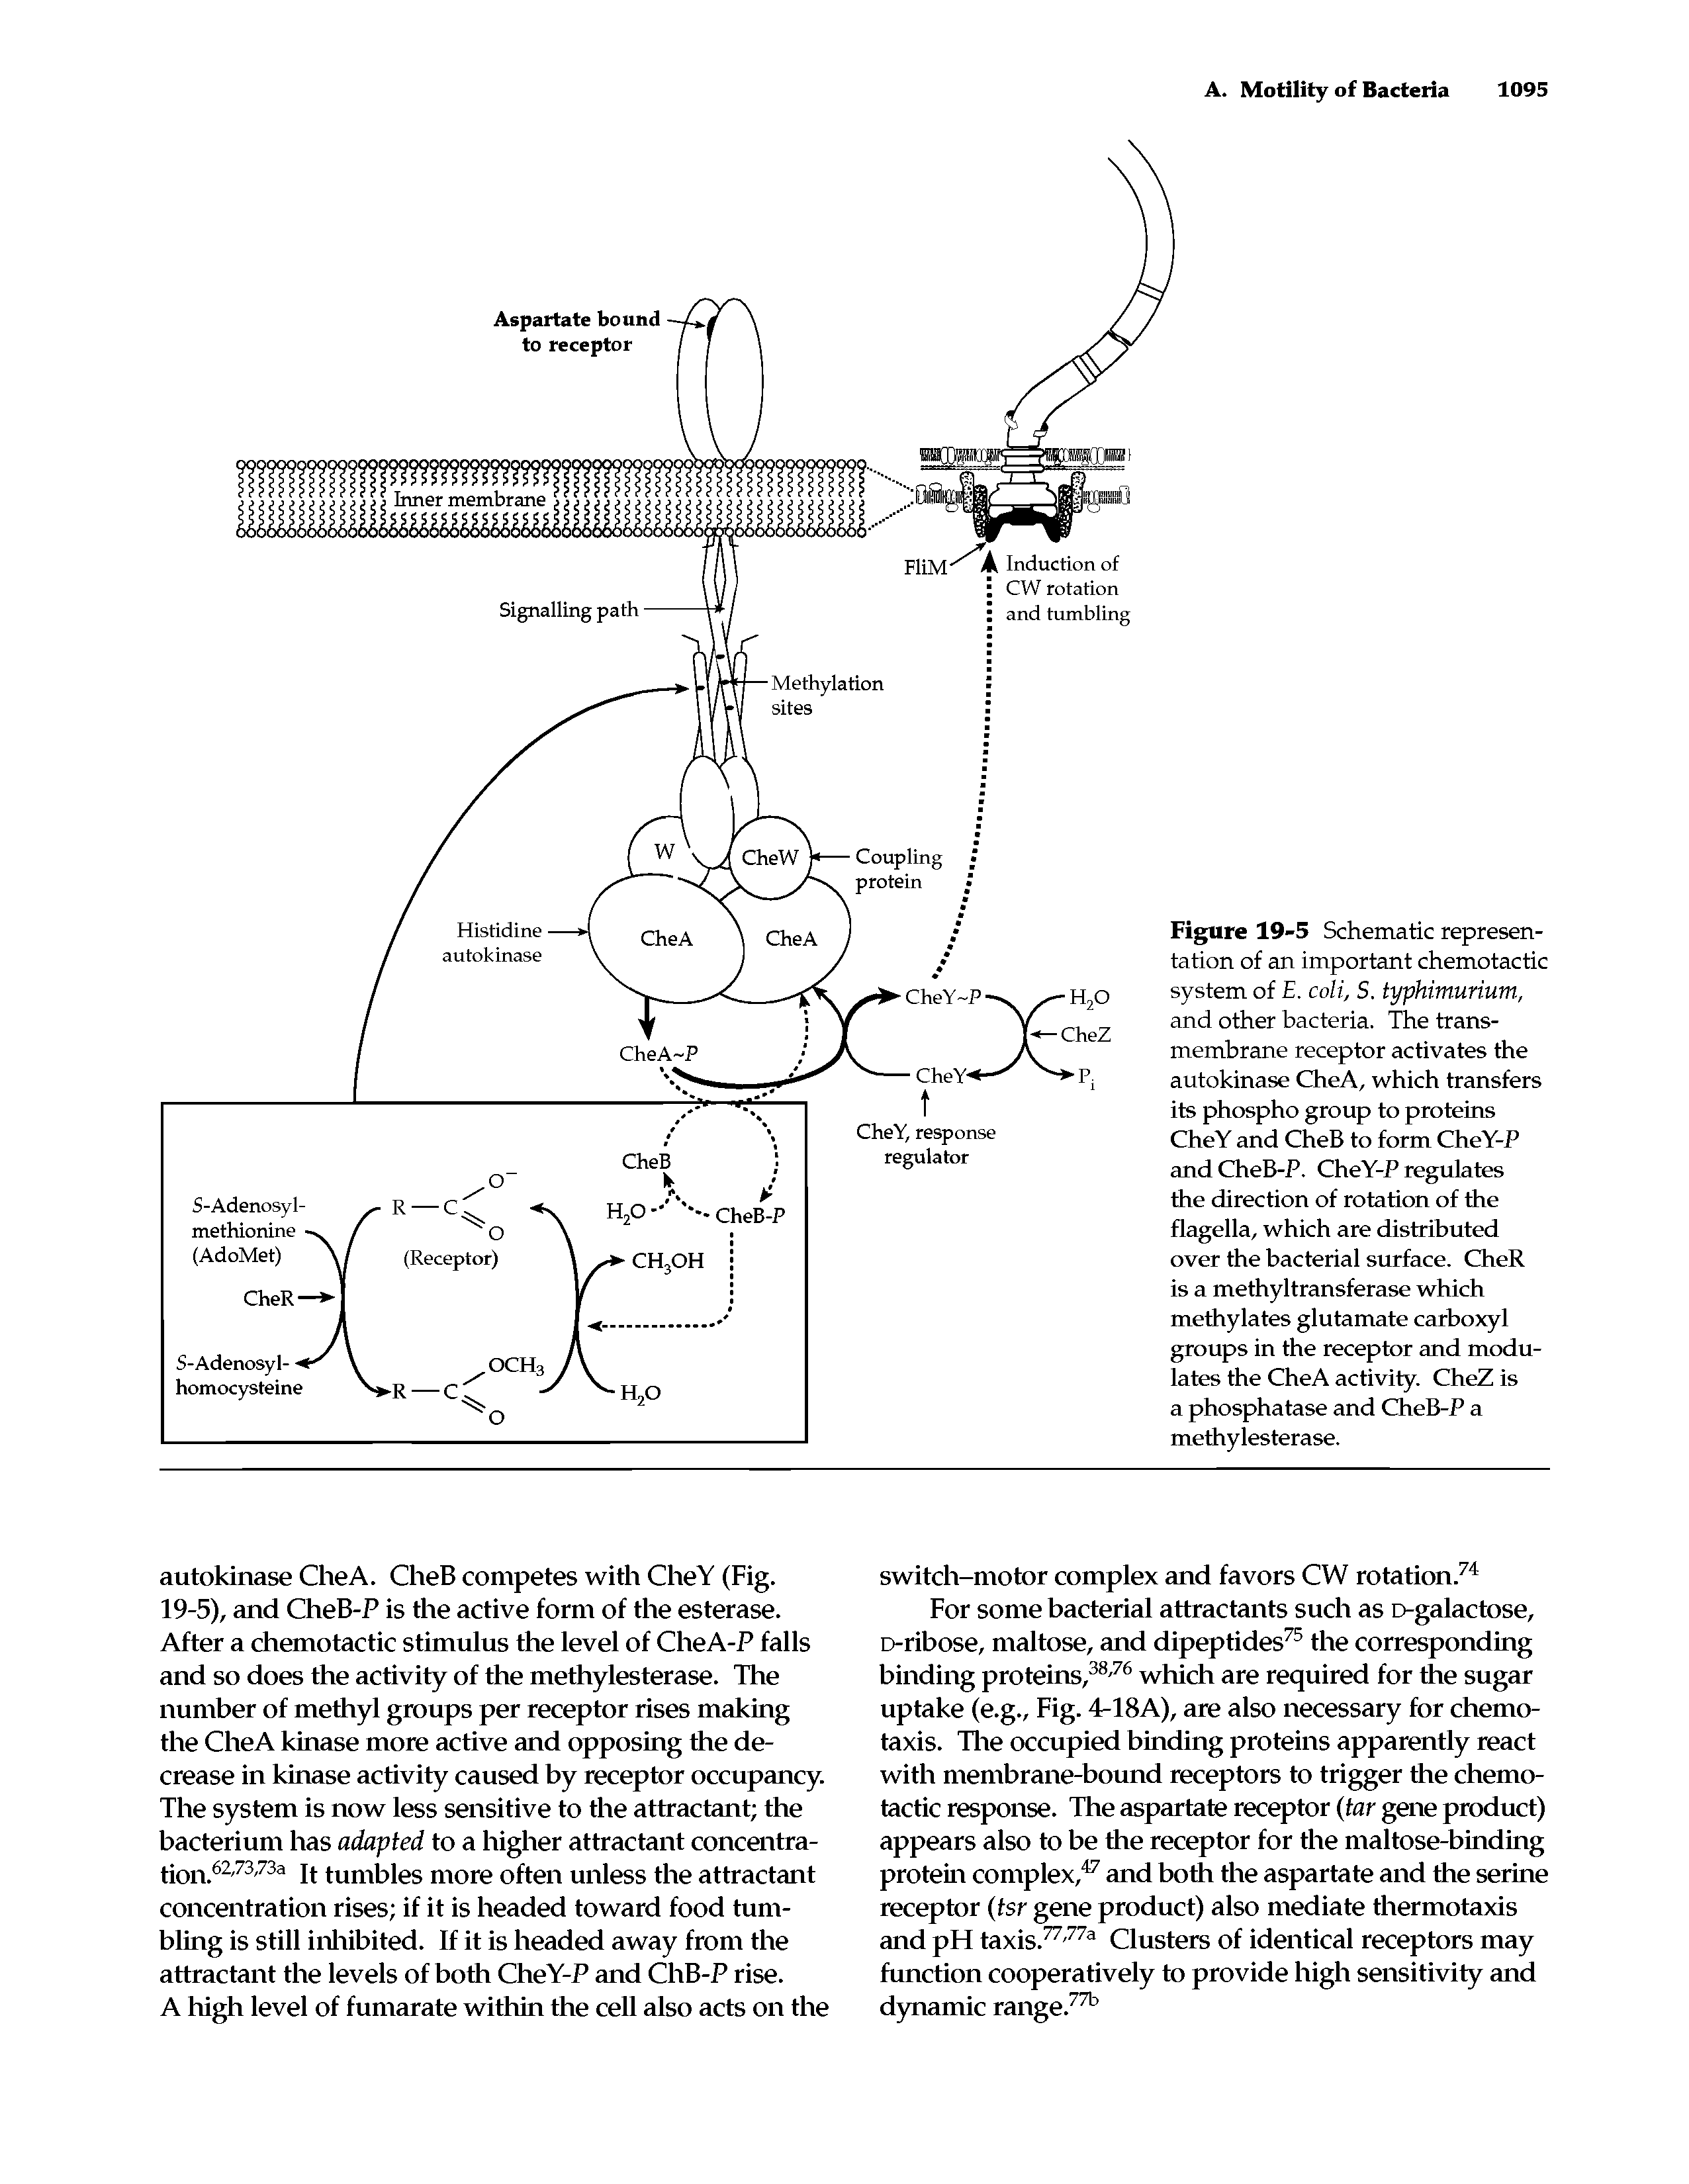 Figure 19-5 Schematic representation of an important chemotactic system of E. coli, S. typhimurium, and other bacteria. The transmembrane receptor activates the autokinase CheA, which transfers its phospho group to proteins CheY and CheB to form CheY-P and CheB-P. CheY-P regulates the direction of rotation of the flagella, which are distributed over the bacterial surface. CheR is a methyltransferase which methylates glutamate carboxyl groups in the receptor and modulates the CheA activity. CheZ is a phosphatase and CheB-P a methylesterase.